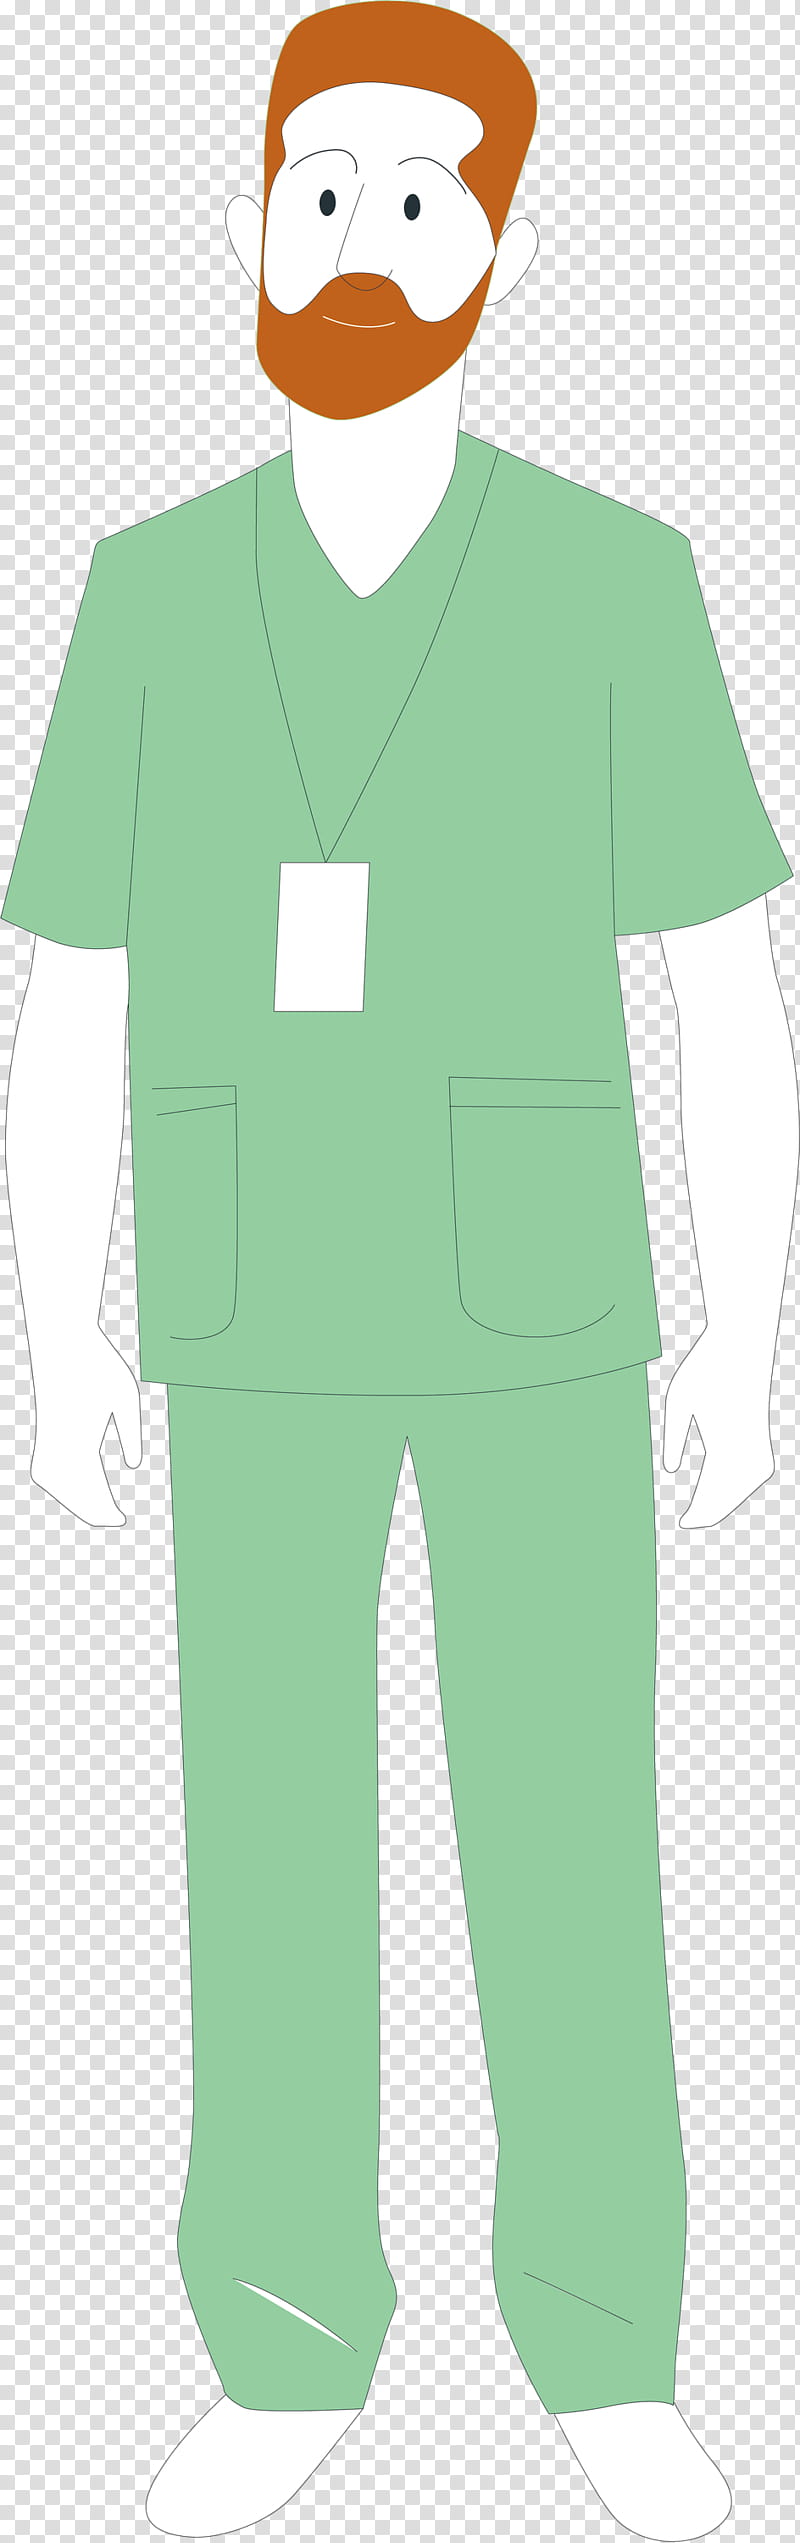 hat character green sleeve uniform, Doctor, Cartoon Doctor, Behavior, Human, Character Created By transparent background PNG clipart